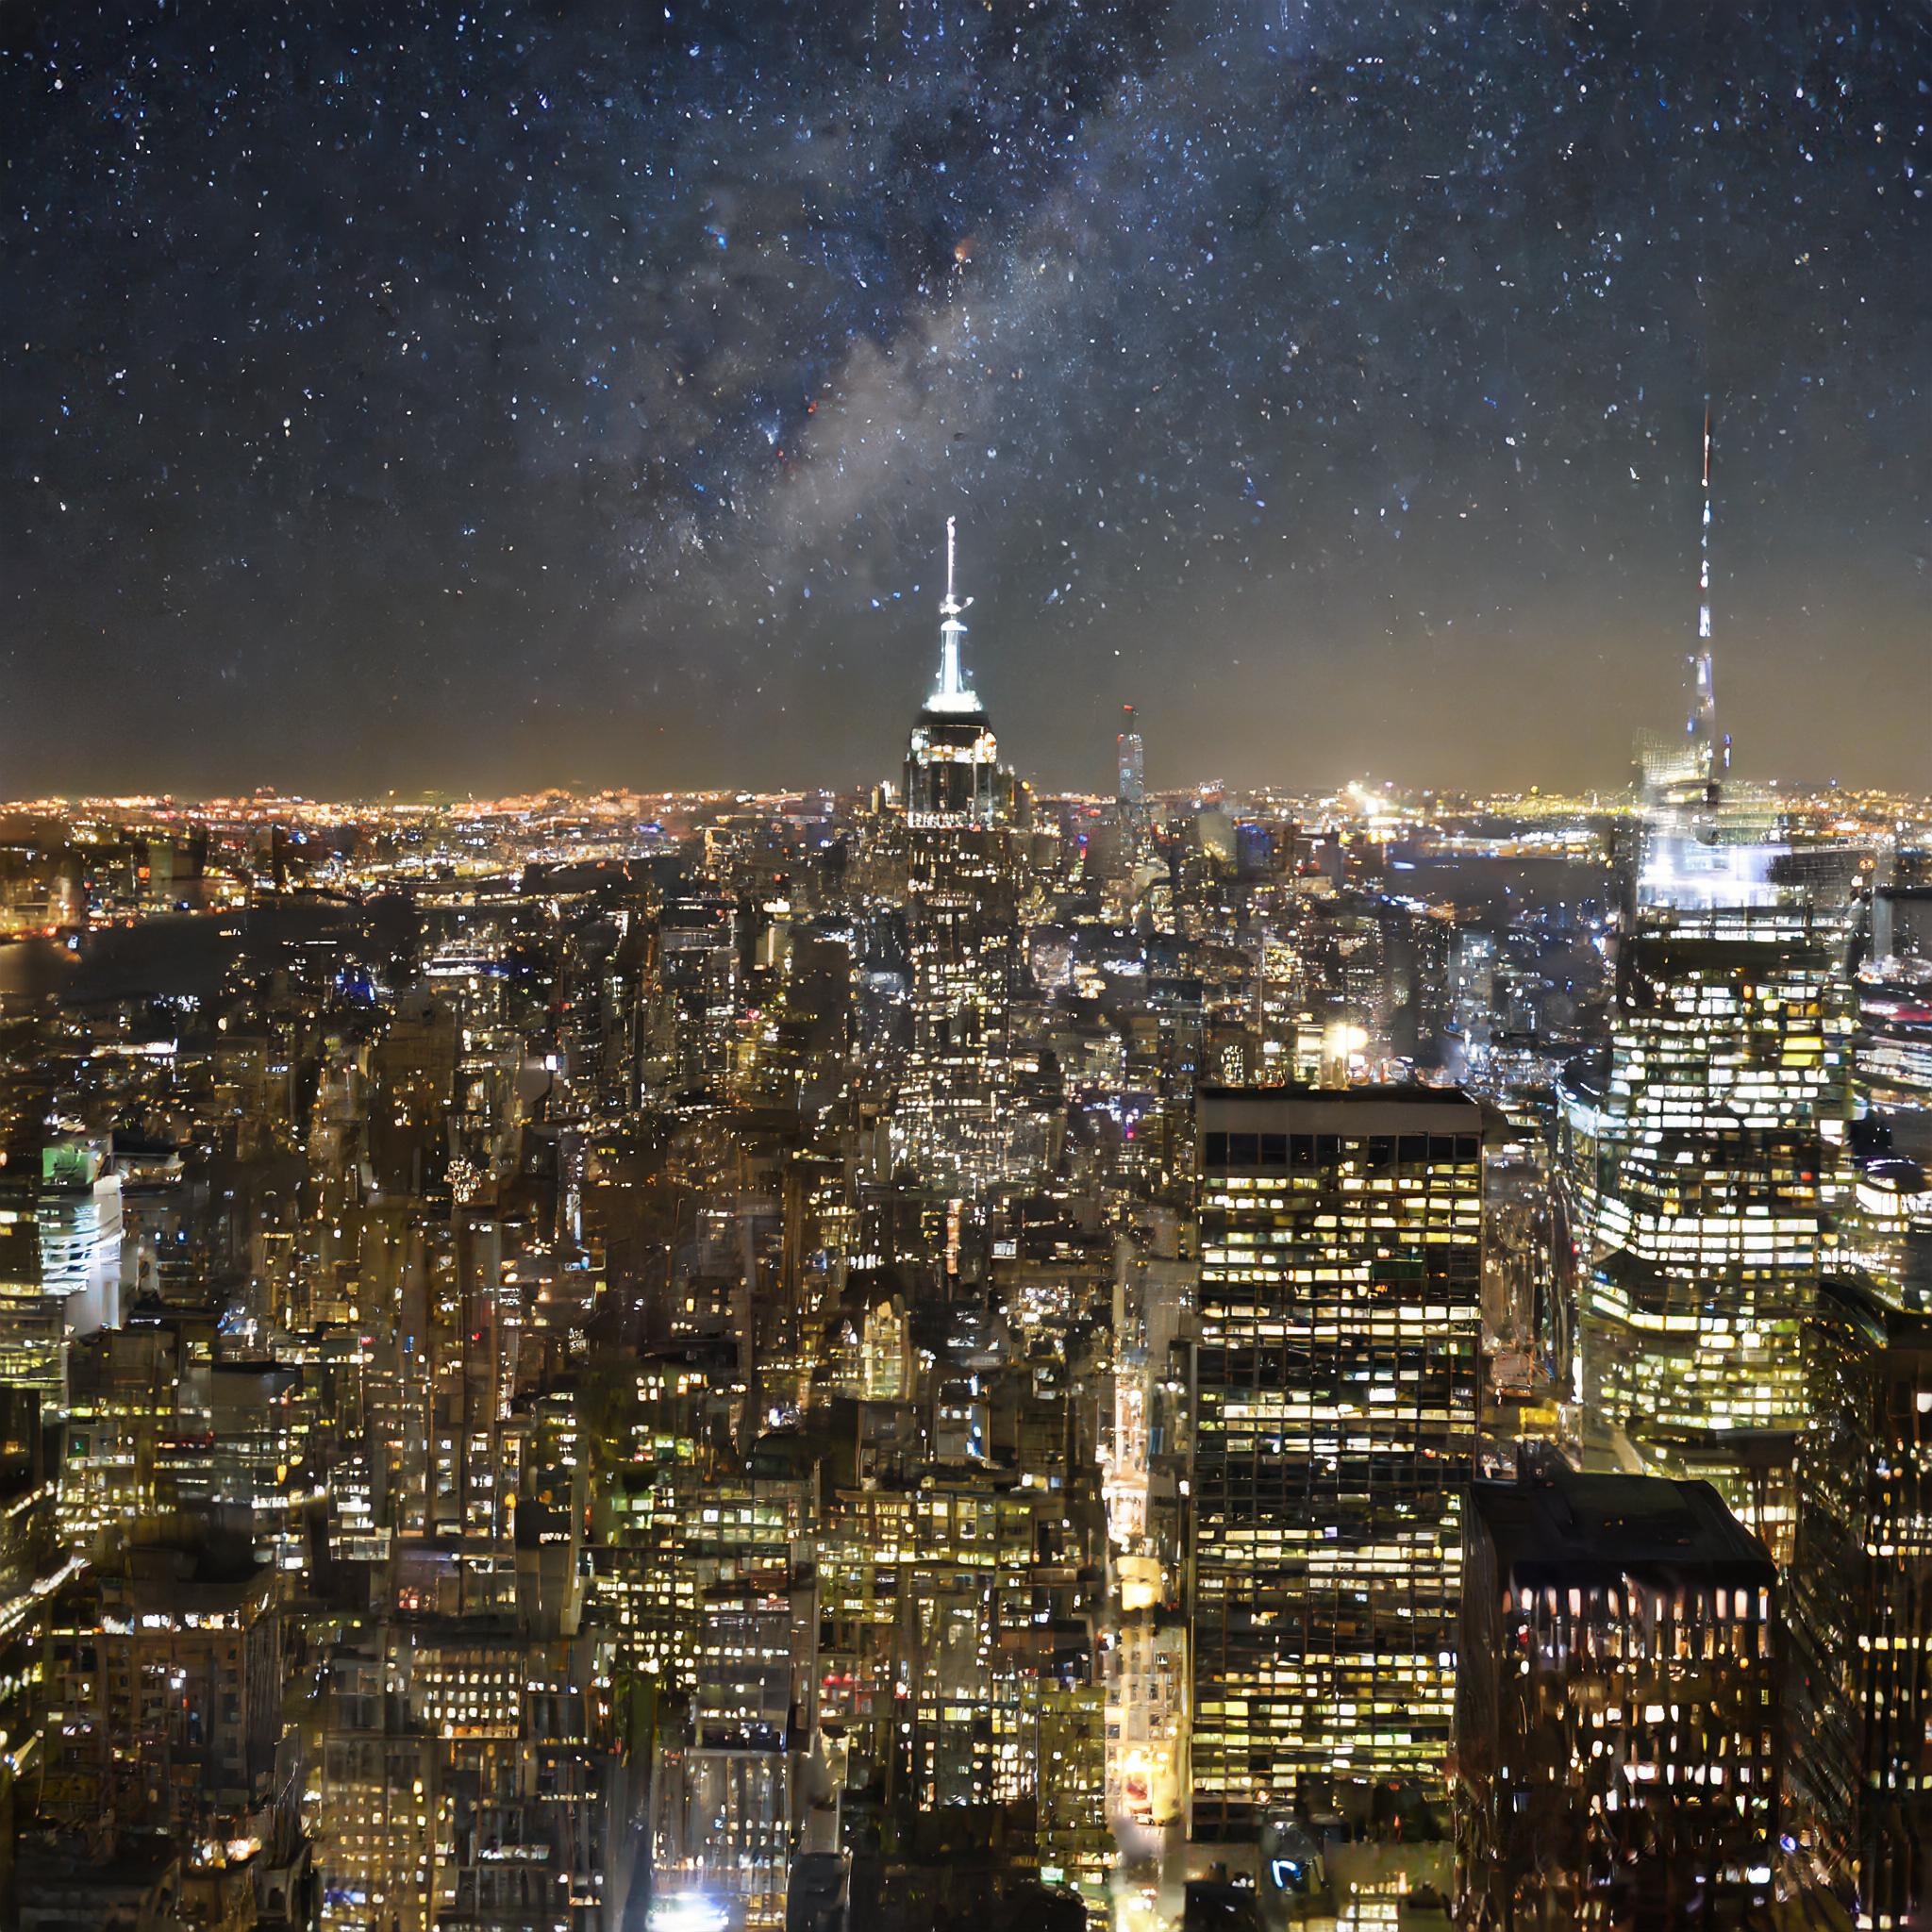  Firefly new york night view zoom in with stars night